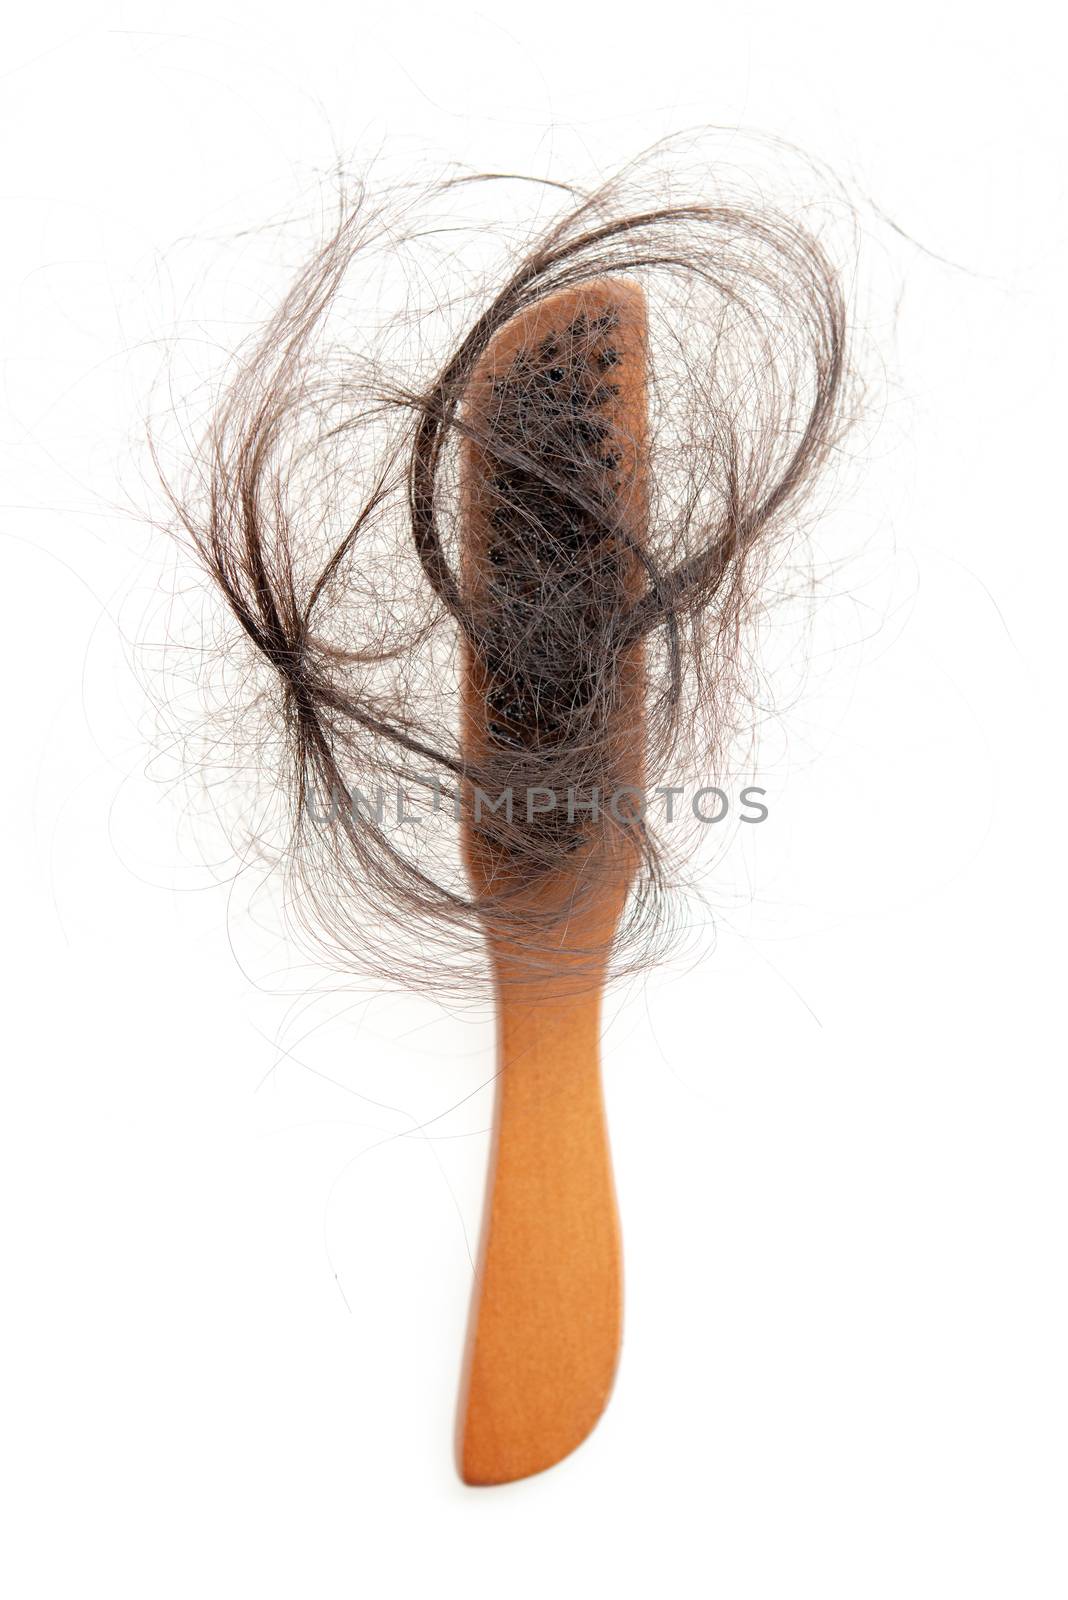 Hairloss problem. Flat lay top view brush with lost hair on it, isolated on white background.